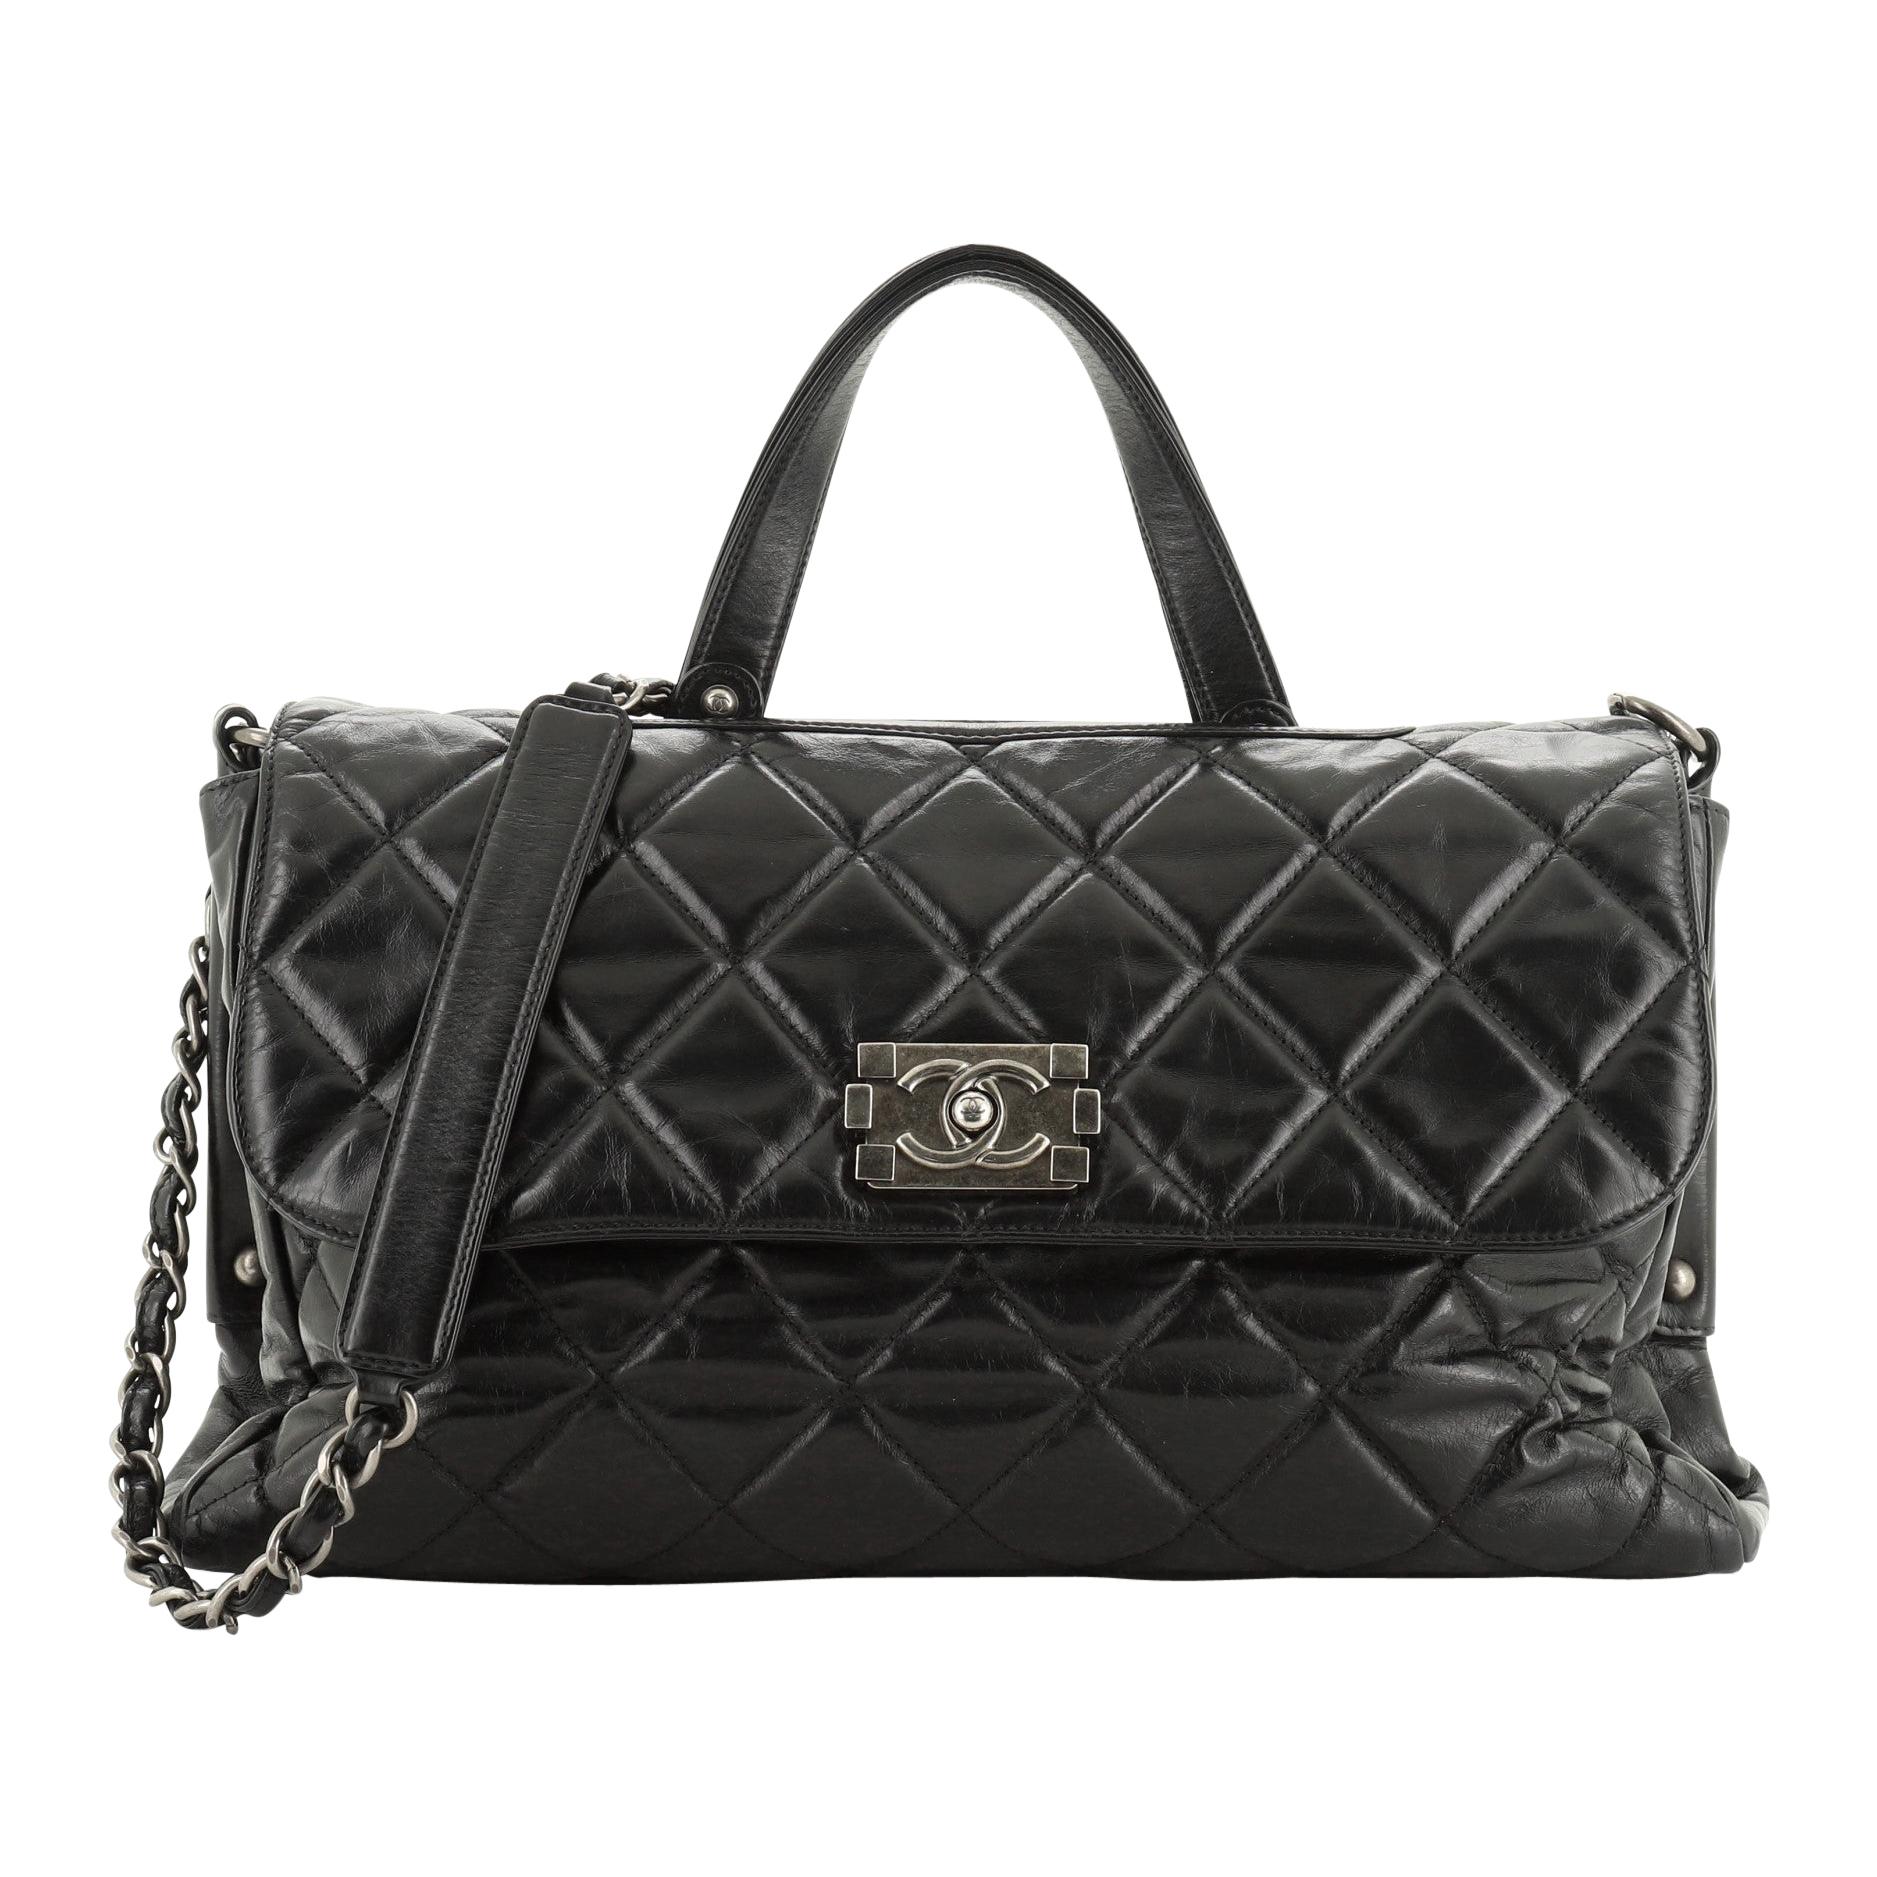 Fancy A Tweed Satchel From Chanel's Latest Collection? - BAGAHOLICBOY